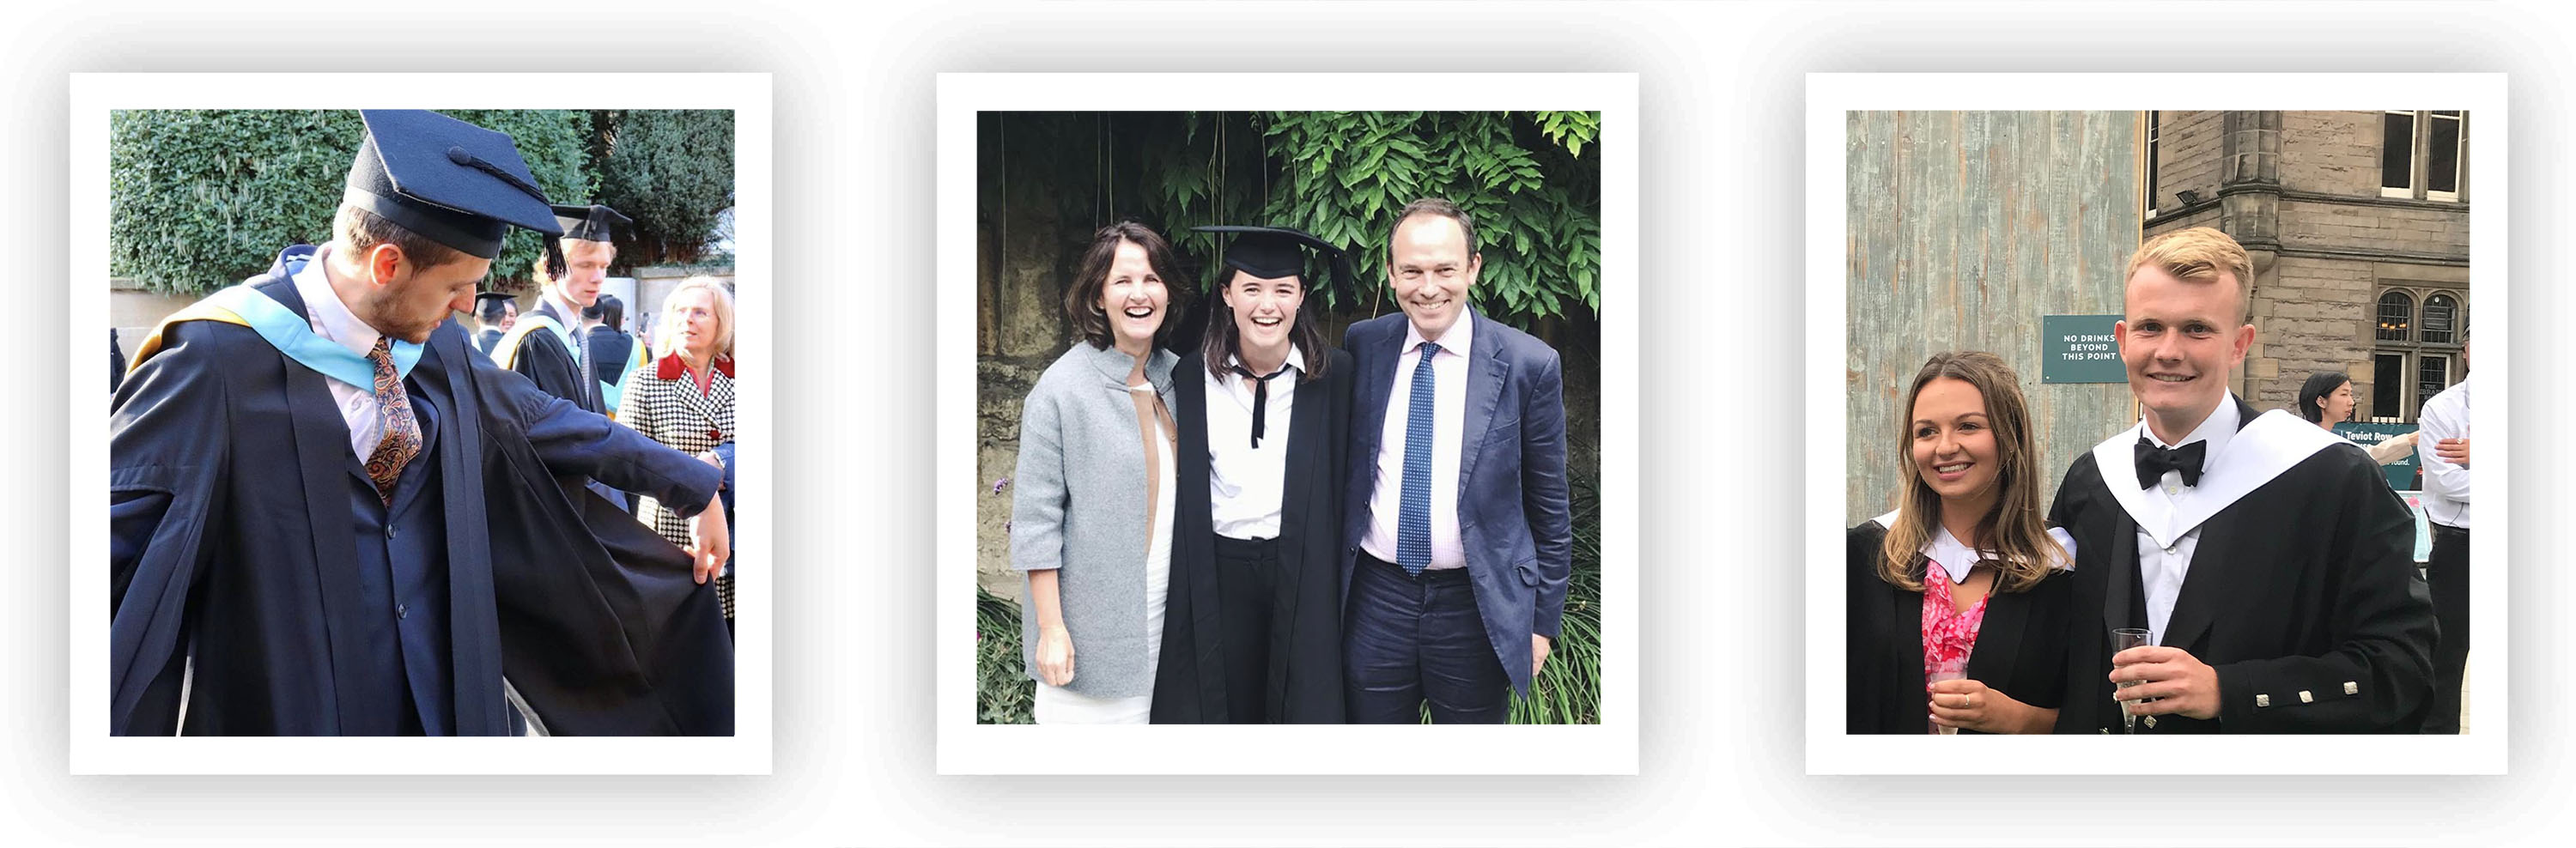 JJ, Annabel and James – some of our recent grad joiners